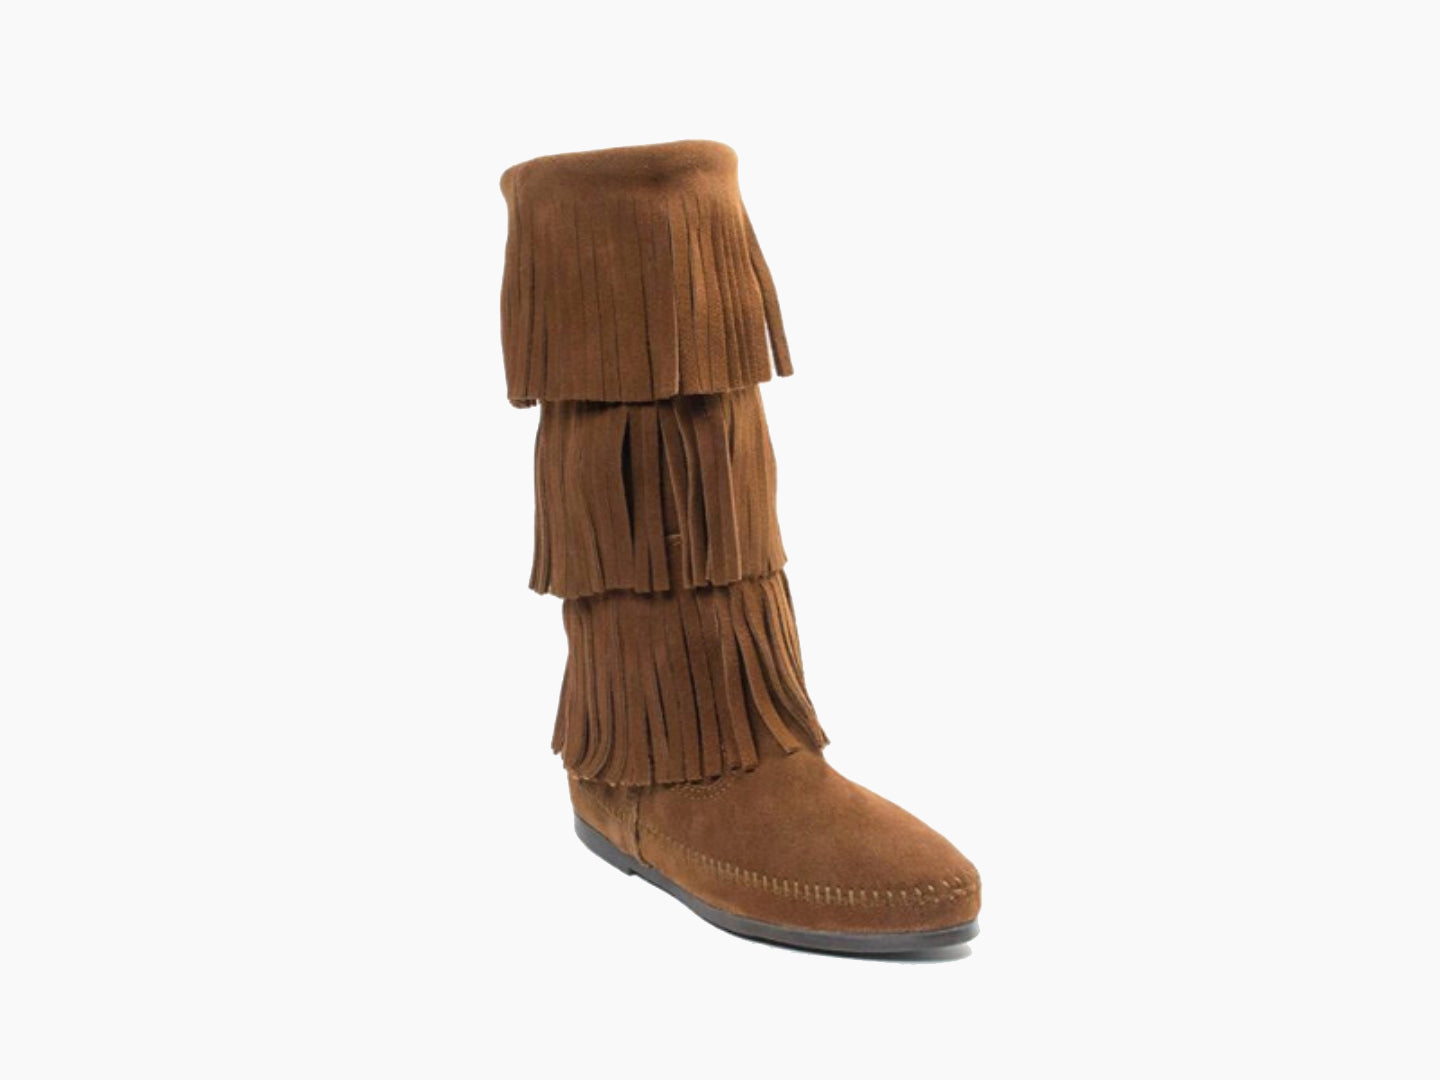 3-Layer Fringe Boot in Dusty Brown from 3/4 Angle View